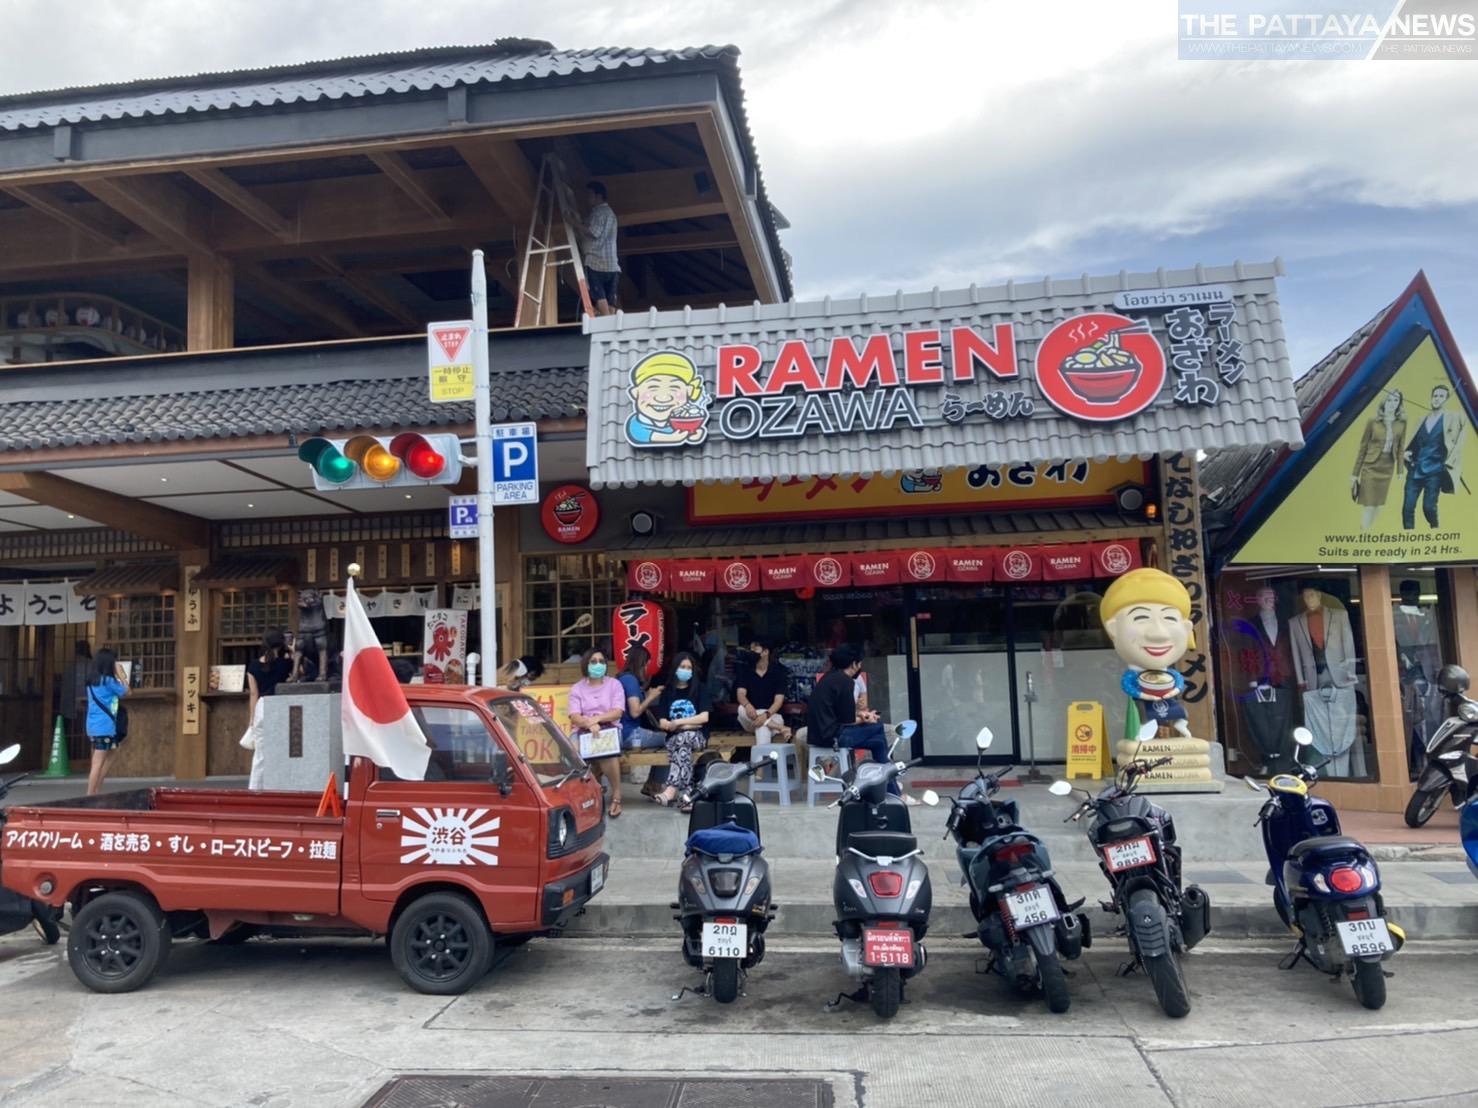 “Ozawa Ramen”, an amazing Japanese restaurant in the heart of Pattaya is inviting YOU to visit